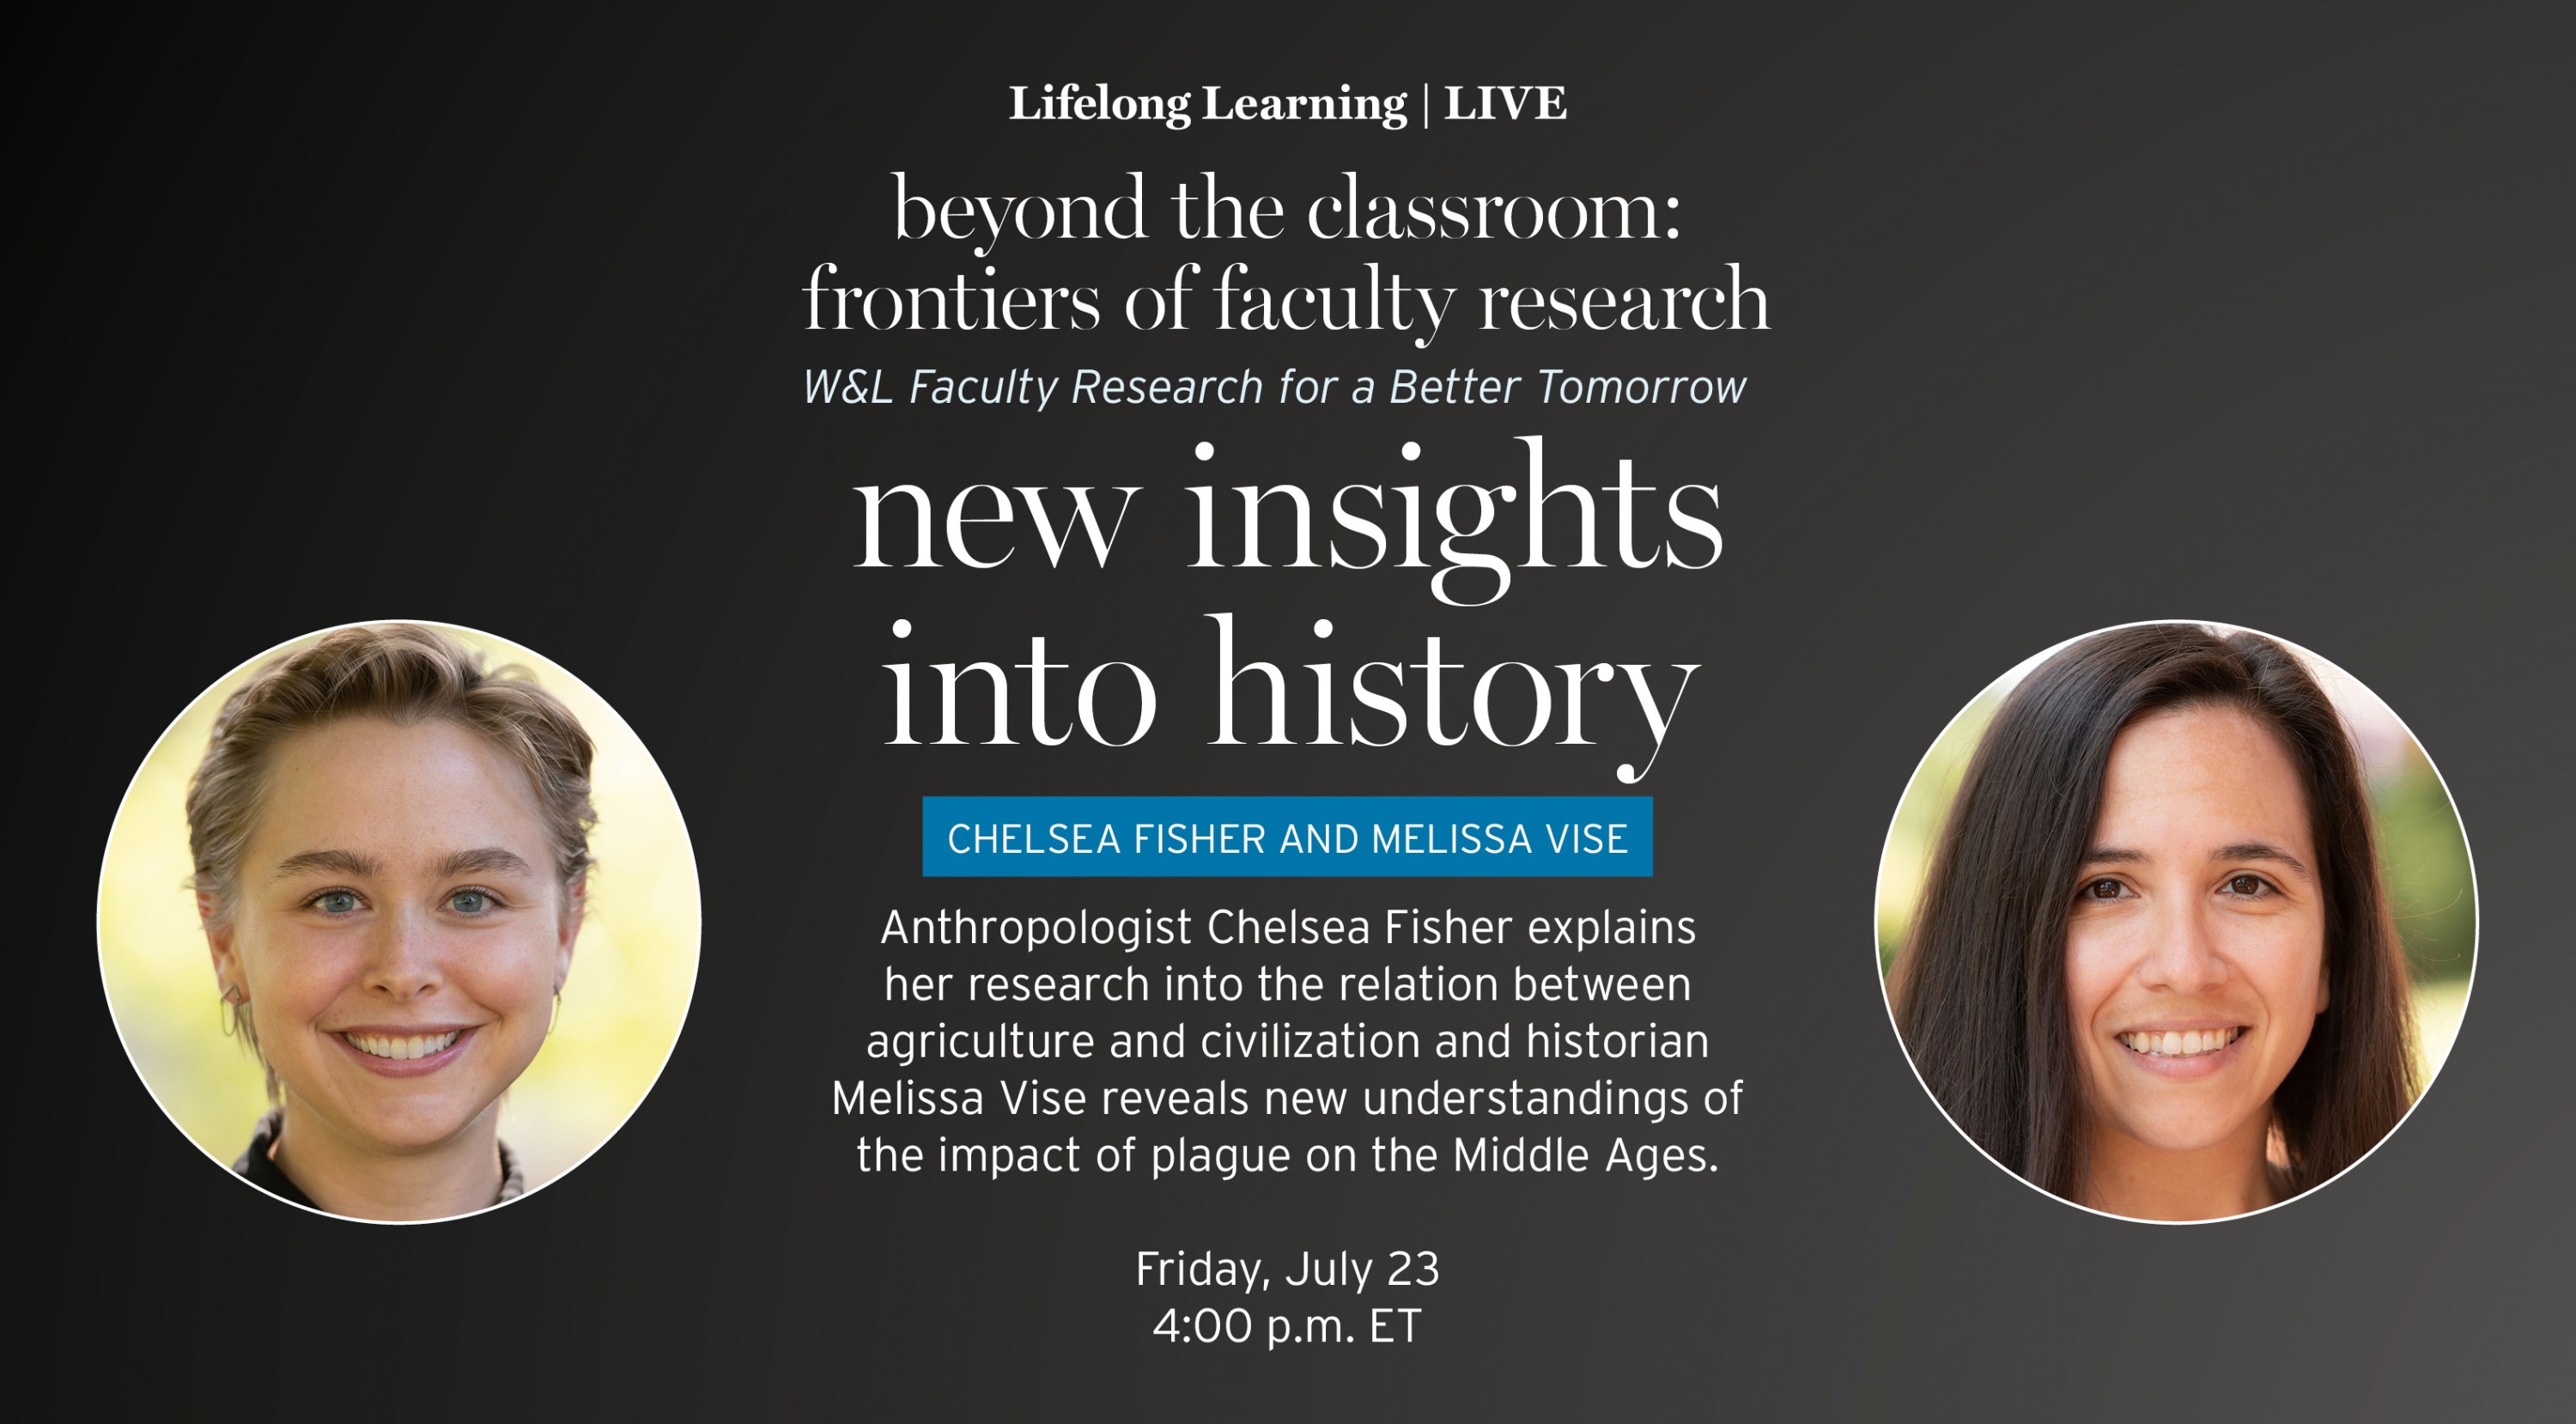 An image of the New Insights Into History presentation, part of the Beyond the Classroom: Frontiers of Faculty Research series